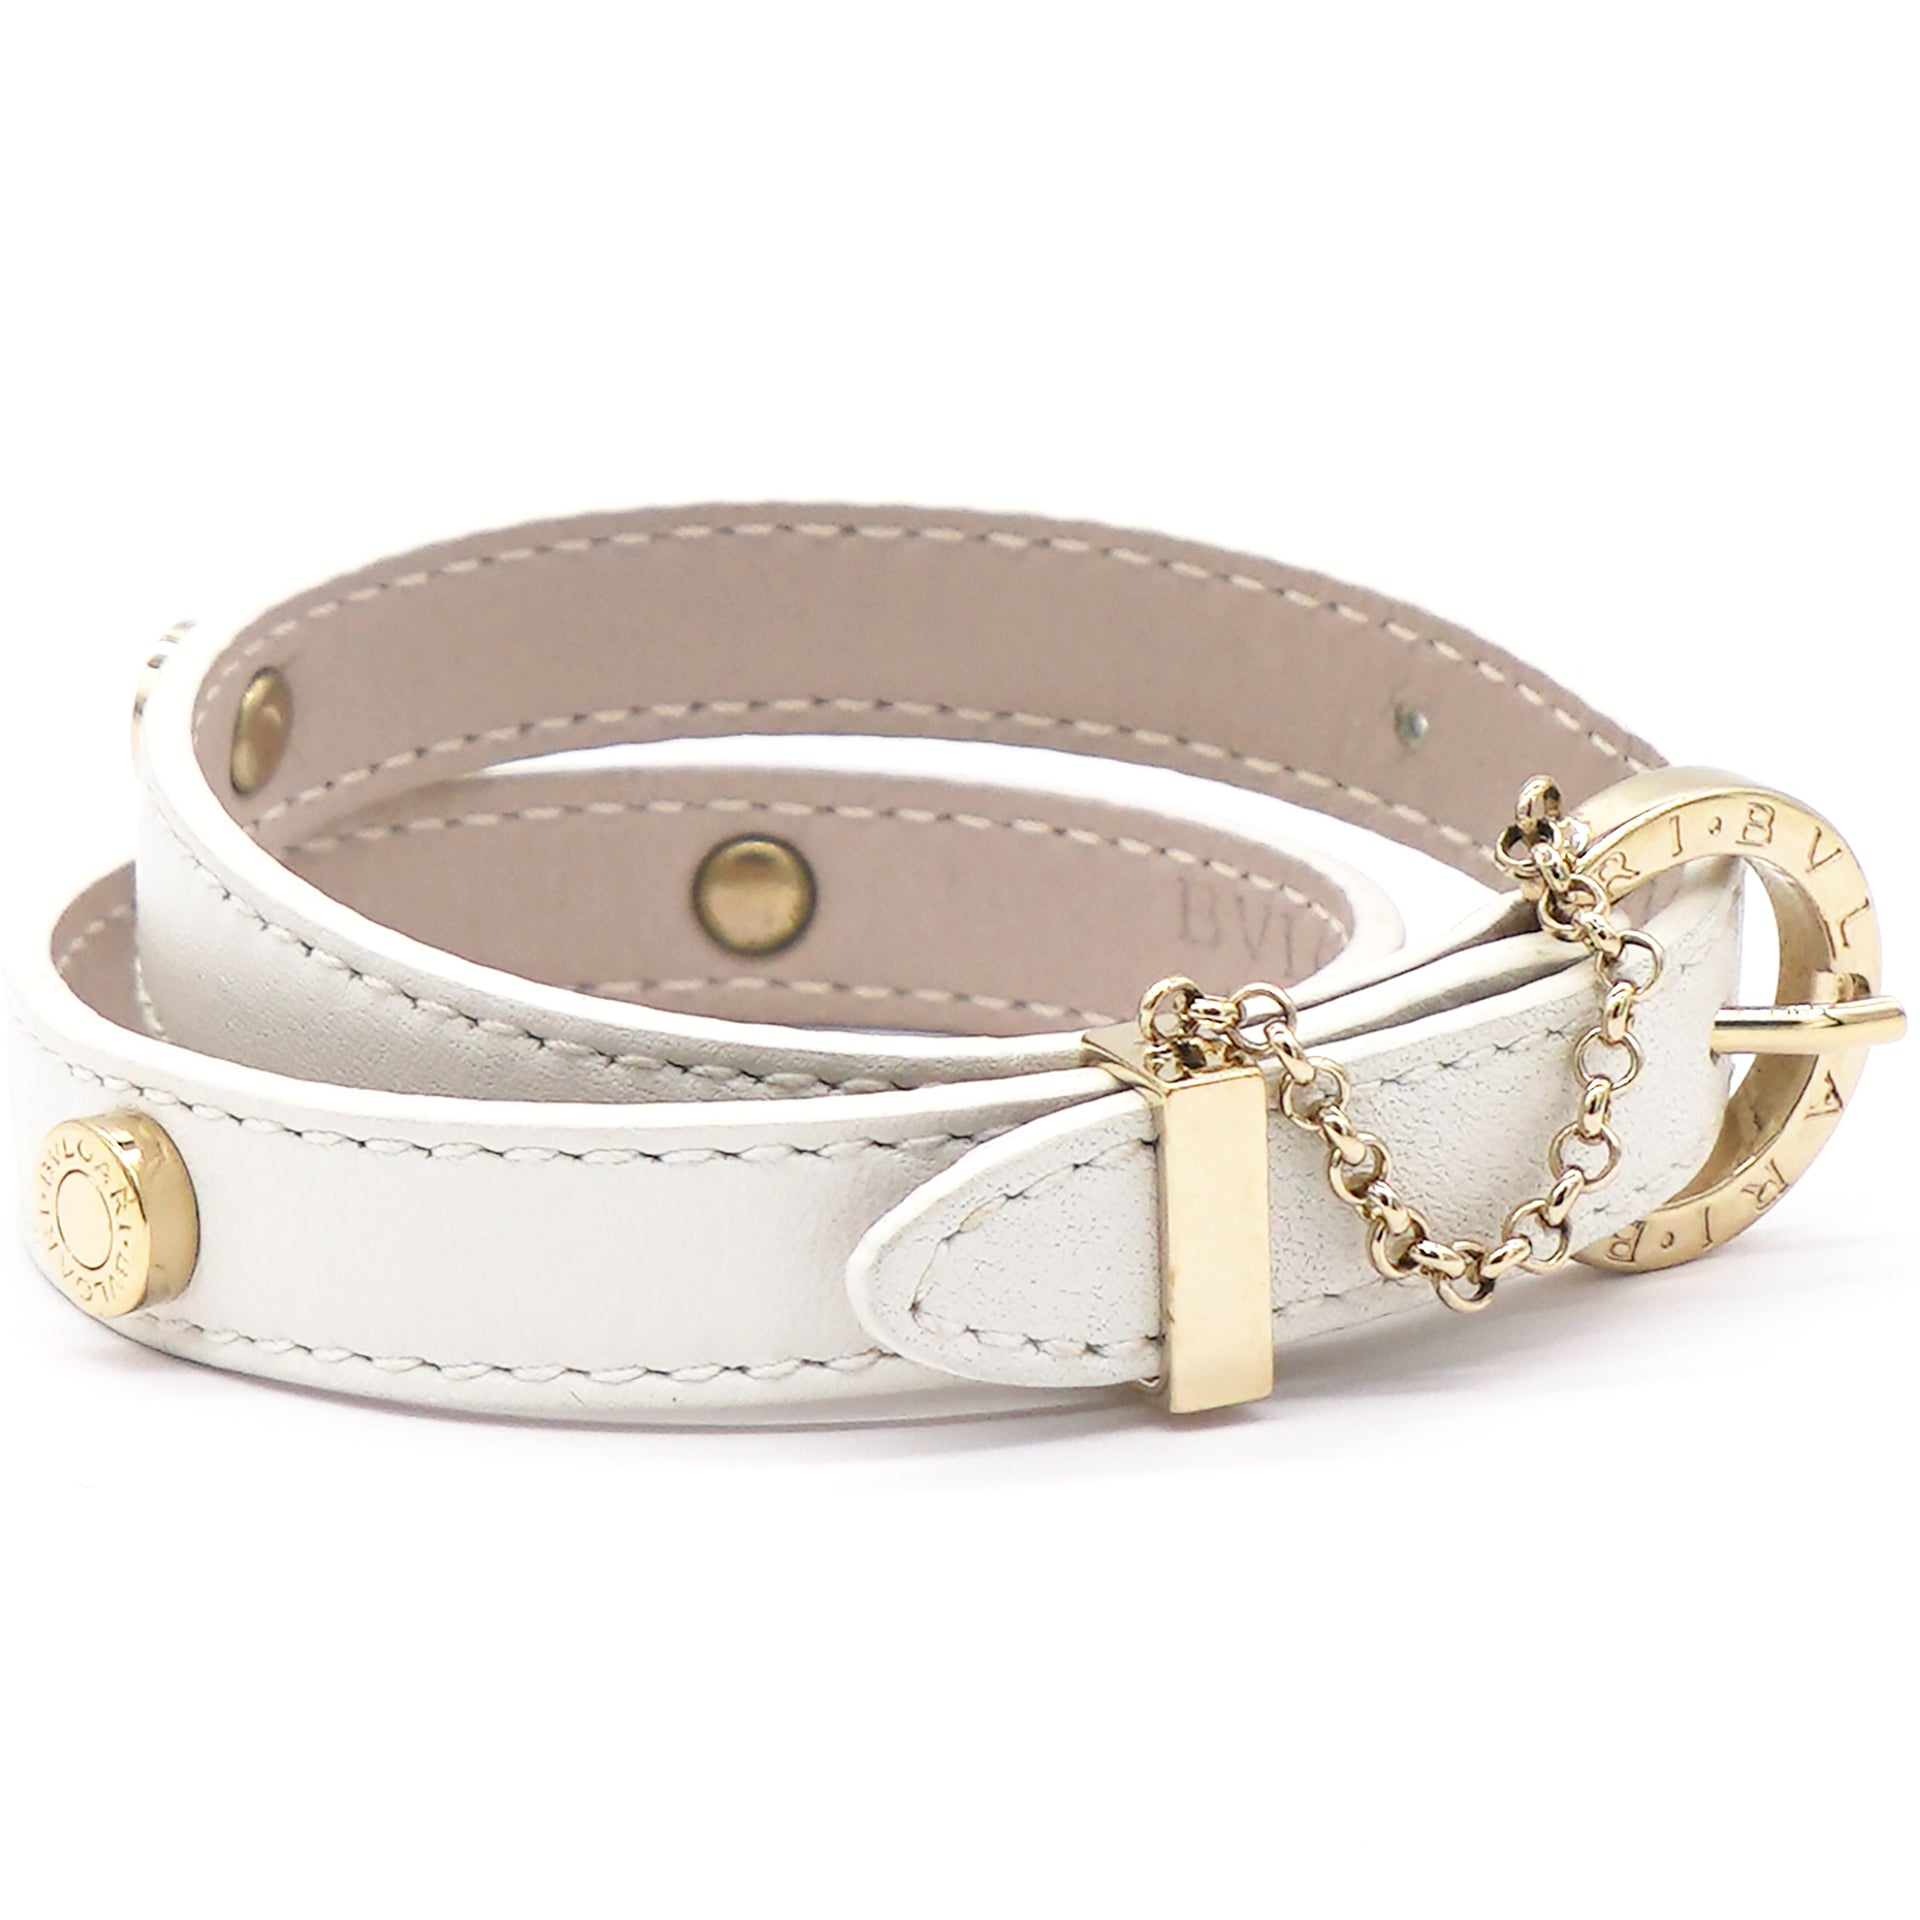 Gold Plated Studs & Cream Double Leather Bracelet